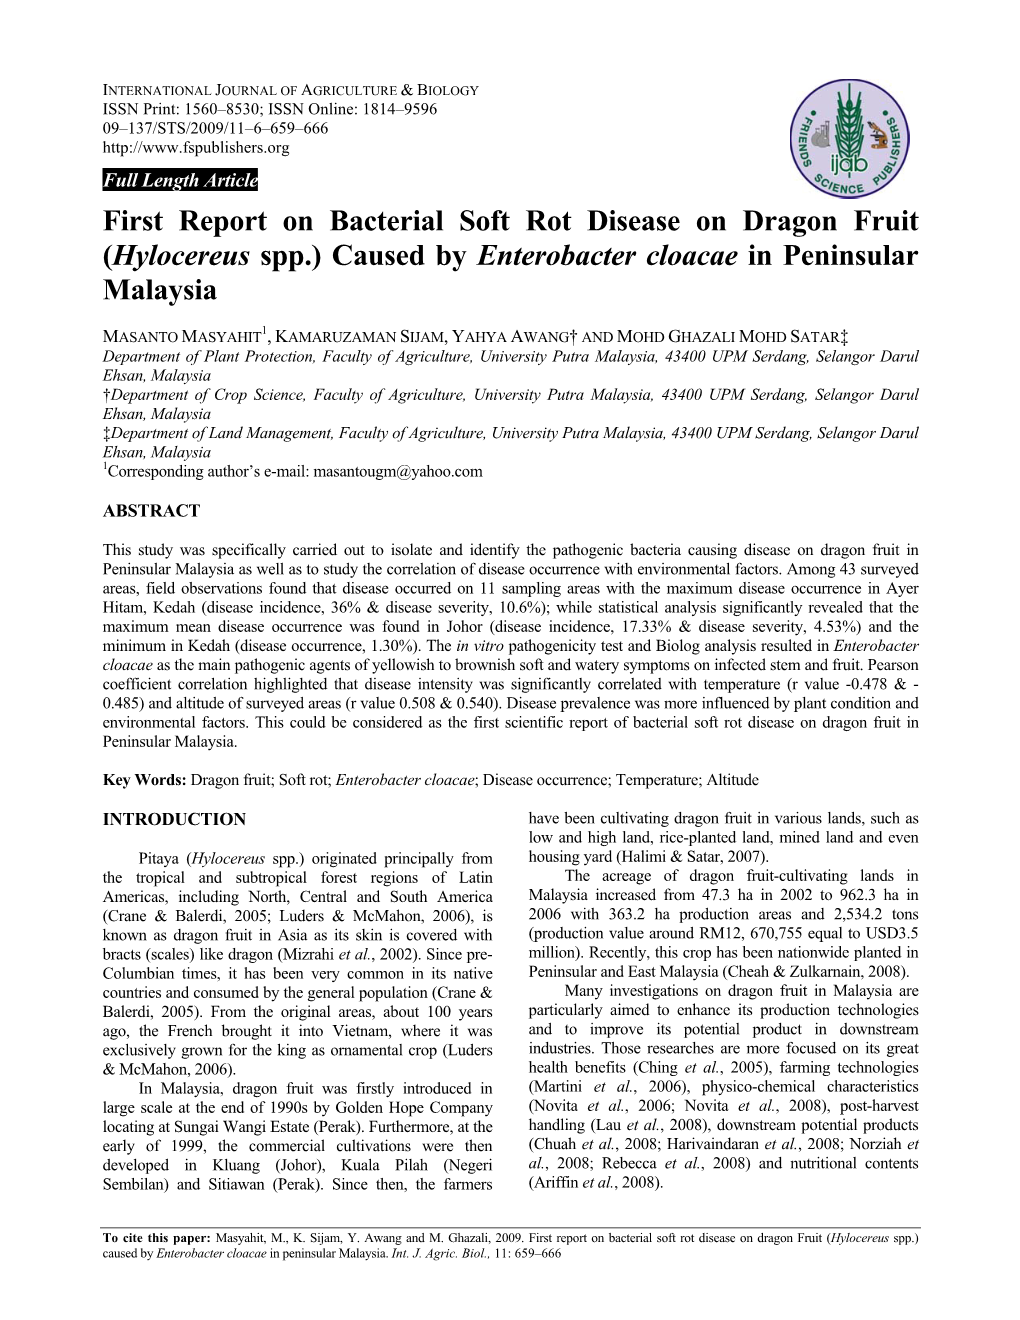 First Report on Bacterial Soft Rot Disease on Dragon Fruit (Hylocereus Spp.) Caused by Enterobacter Cloacae in Peninsular Malaysia